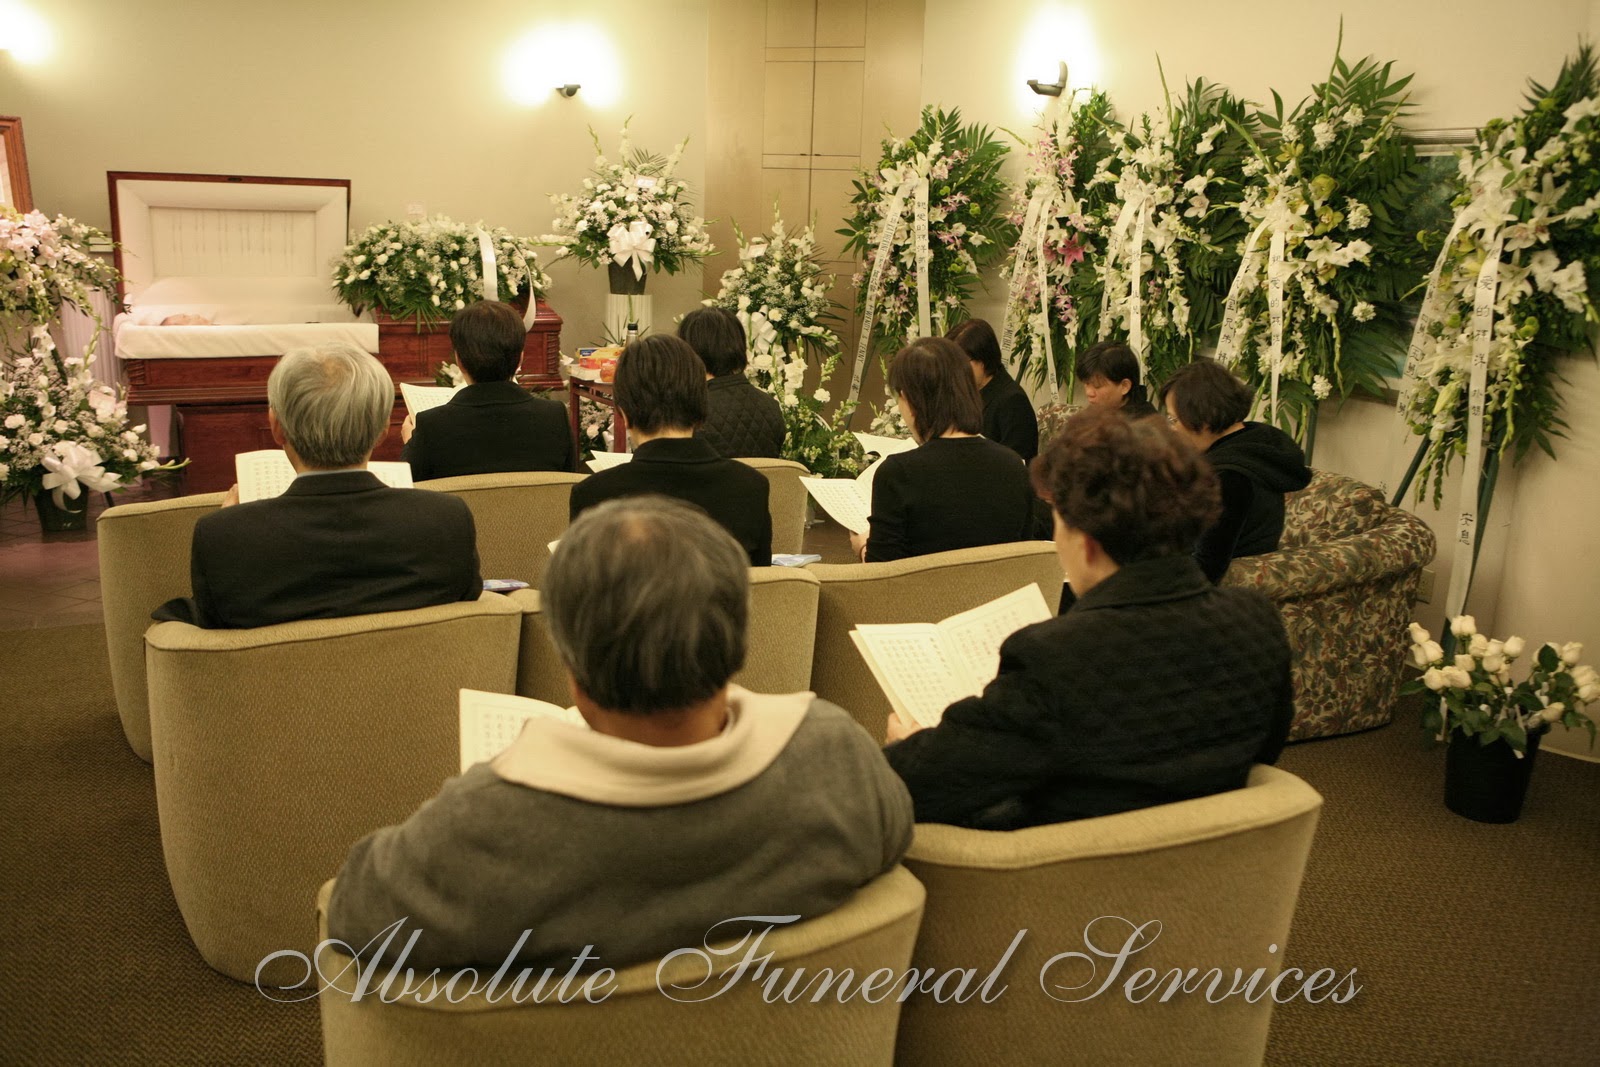 Absolute Funeral Services: Paul's Funeral - Viewing - SkyRose Chapel, Rose Hills ...